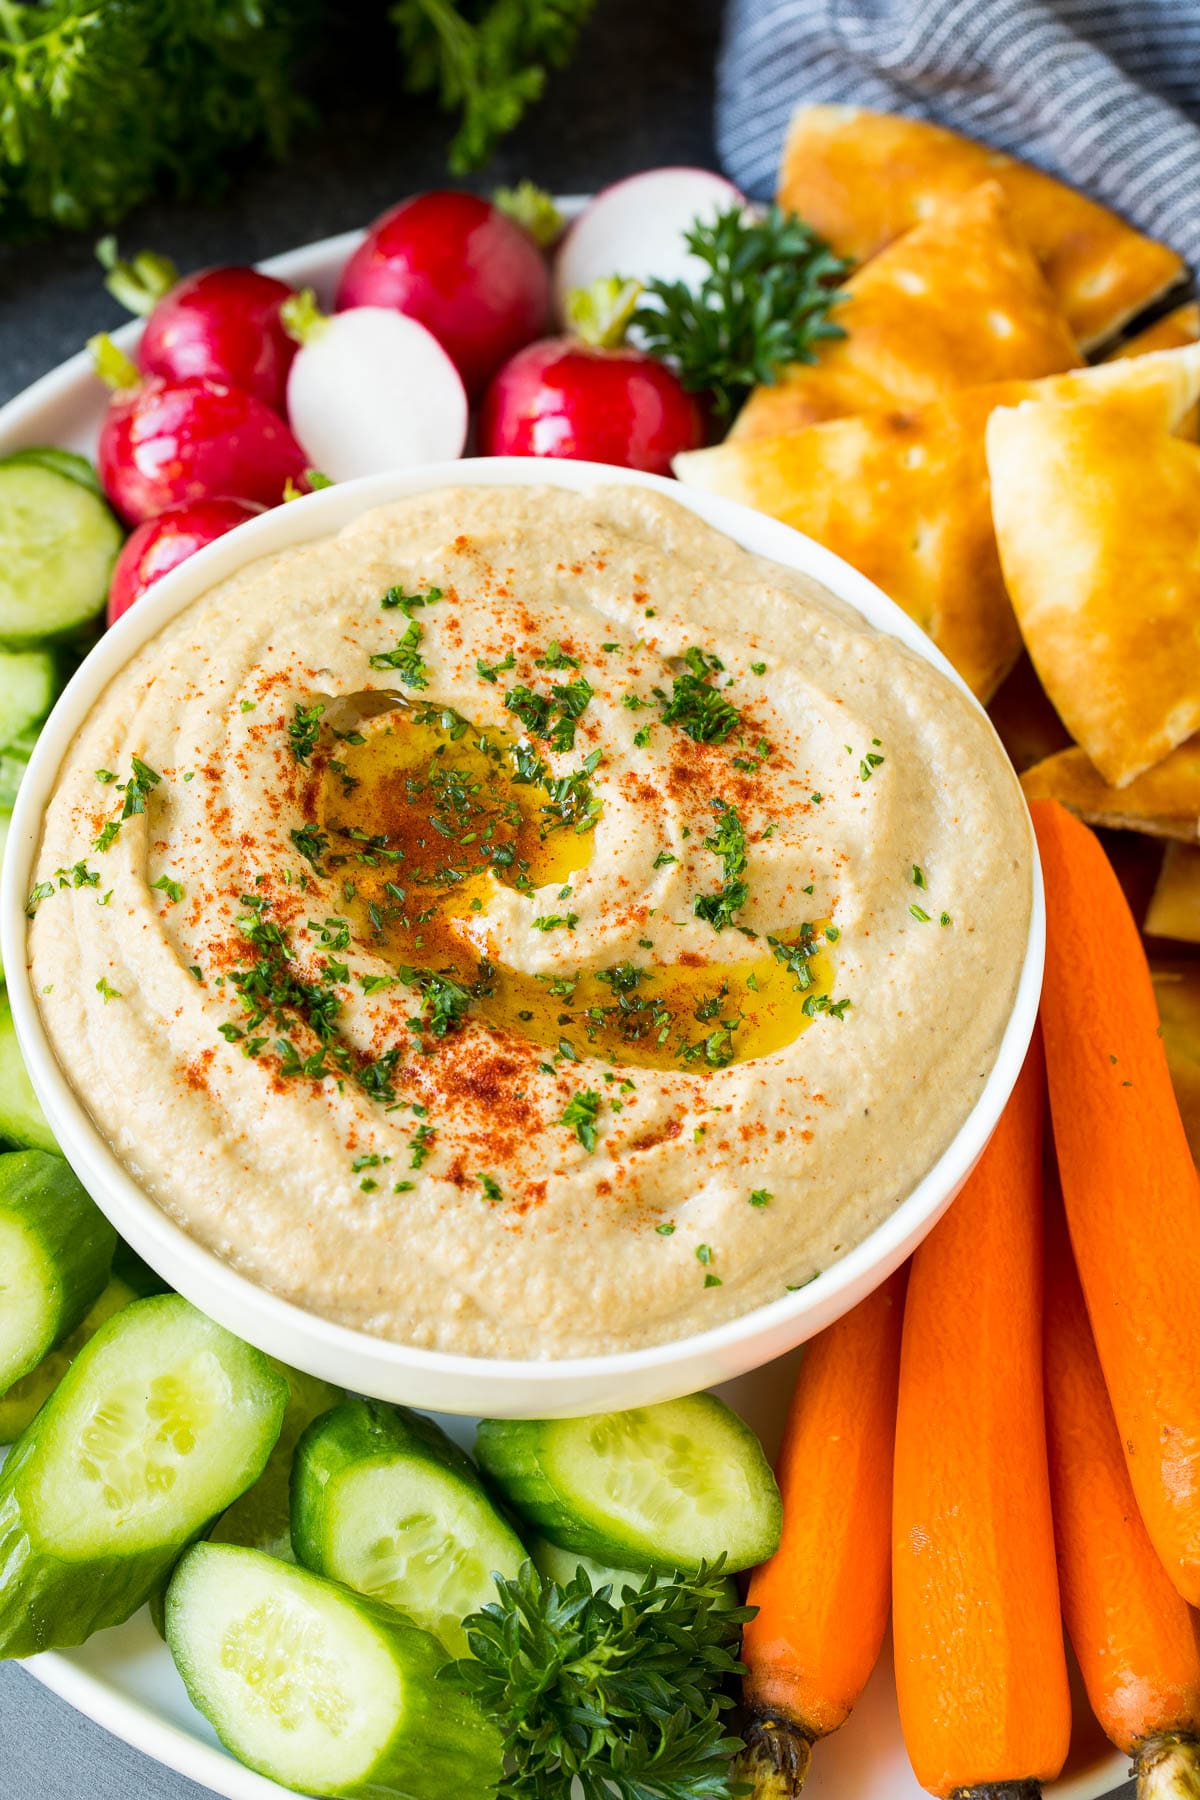 Baba ganoush in a bowl surrounded by bread and vegetables.